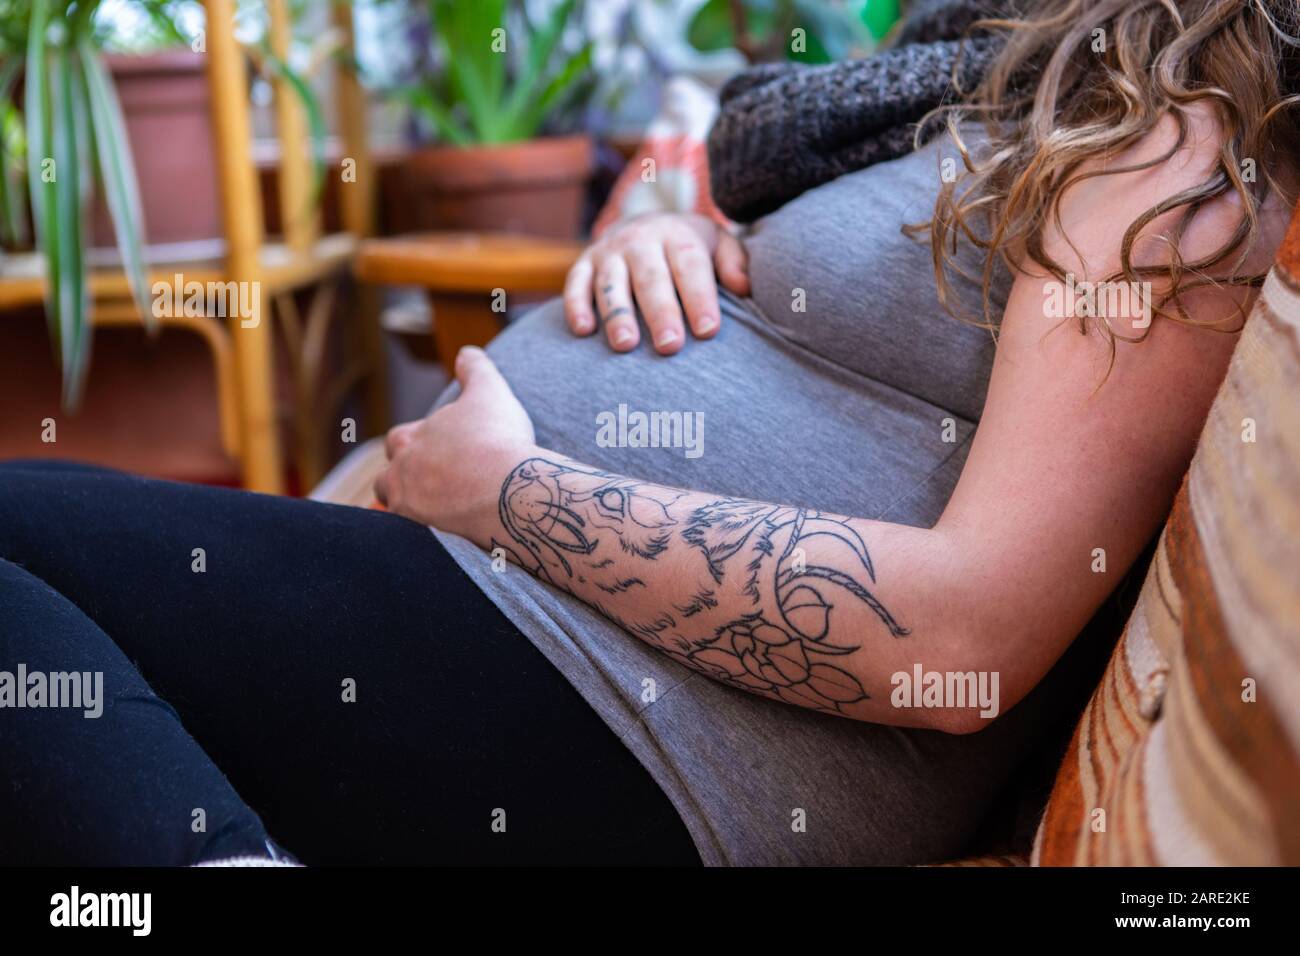 A close up shot of a heavily pregnant woman in the third trimester relaxing on sofa in family room, feeling movements and kicks with hands near labor Stock Photo